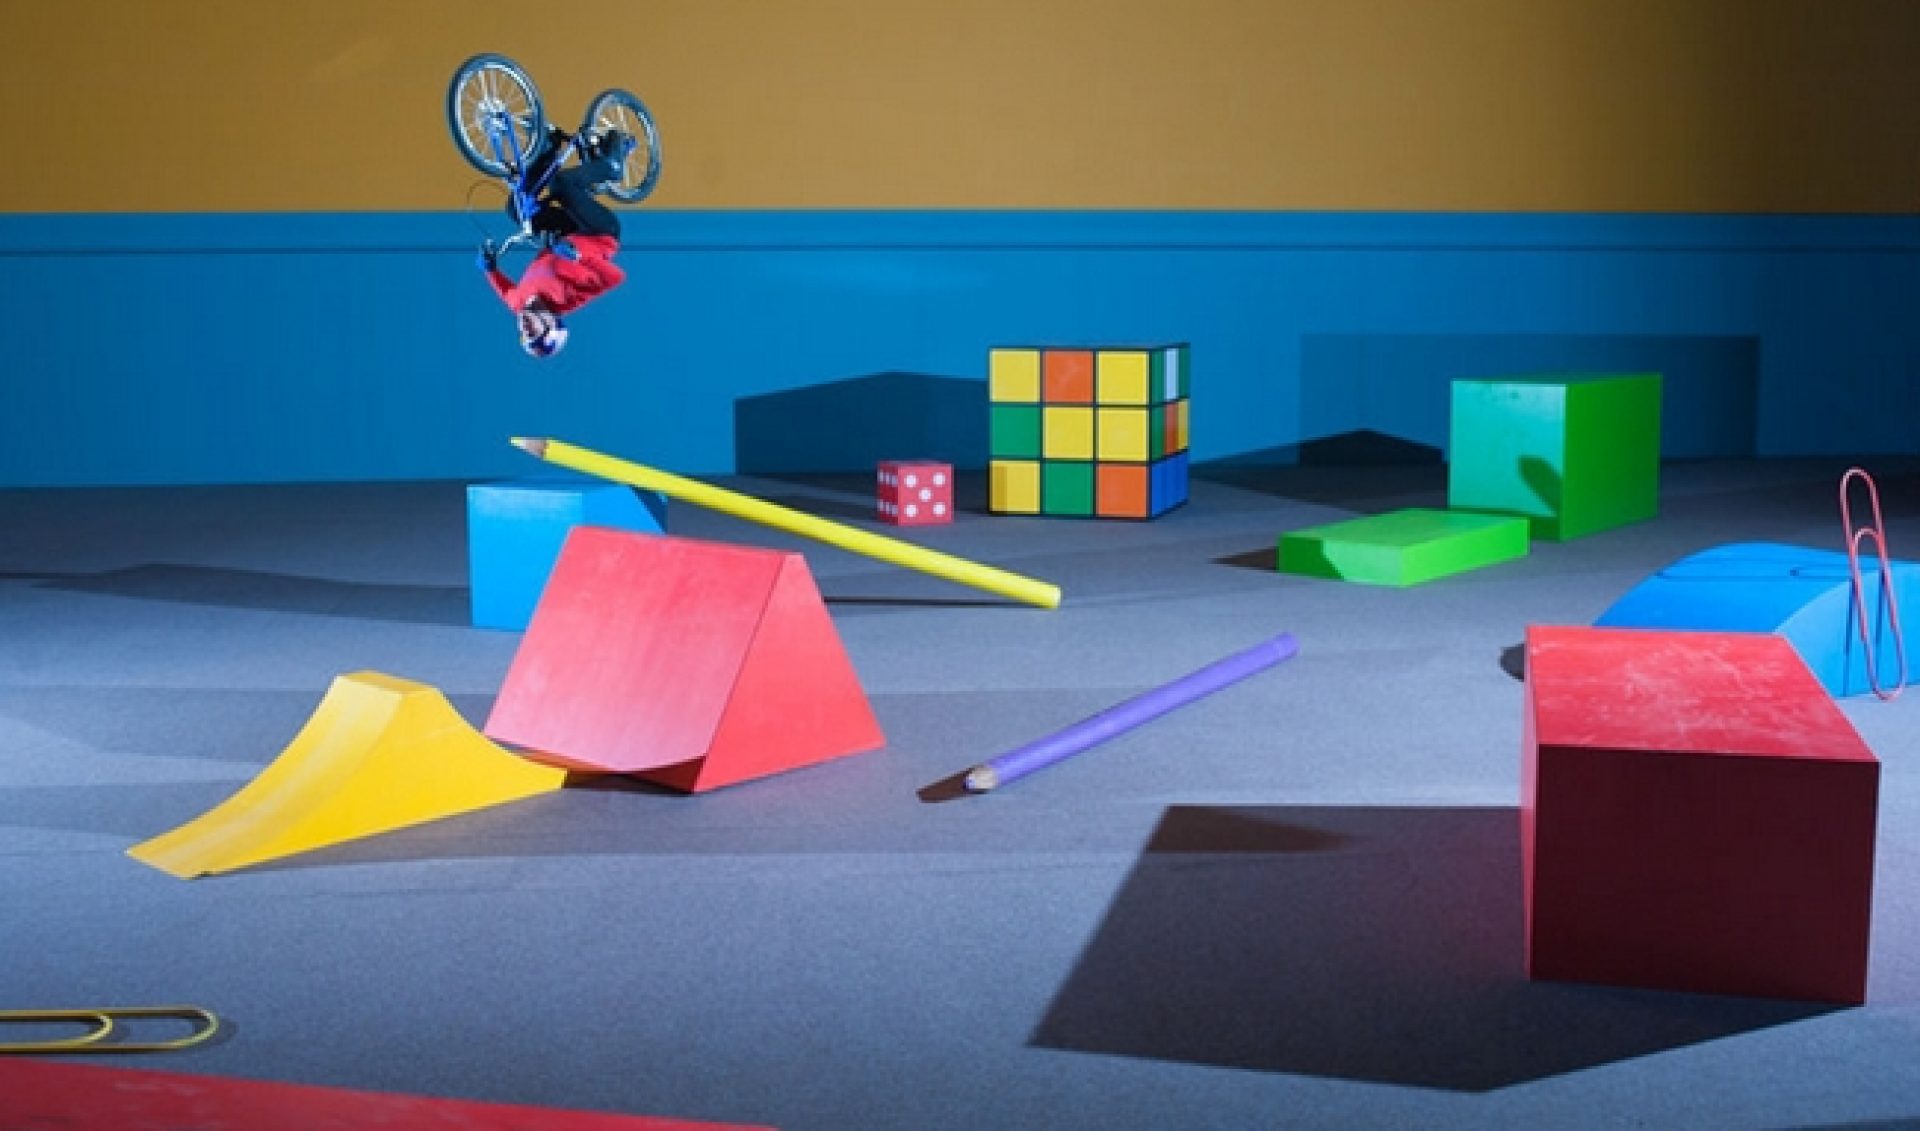 Danny MacAskill’s Latest Red Bull Riding Video Is Remarkably Inventive